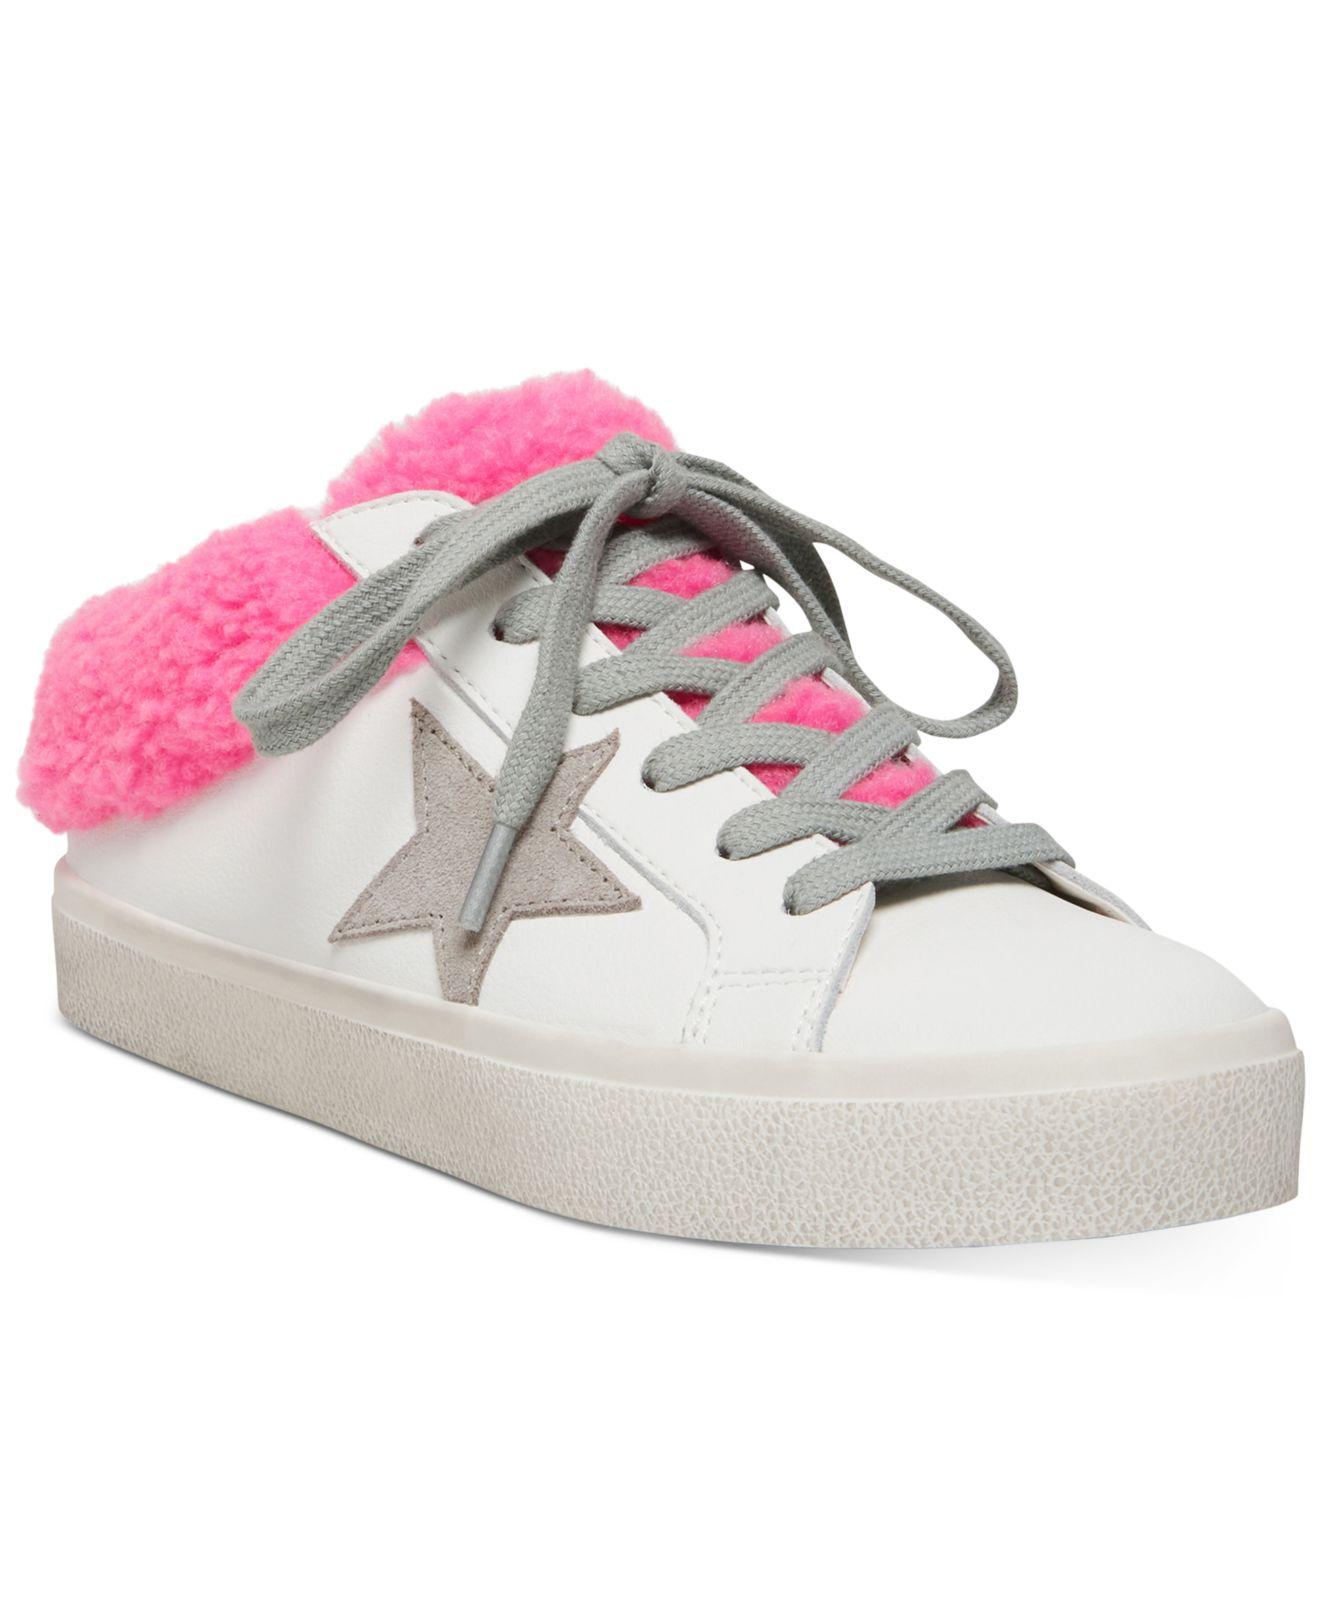 Steve Madden Polaris Faux-fur Backless Sneakers in White/Pink (Pink) - Lyst